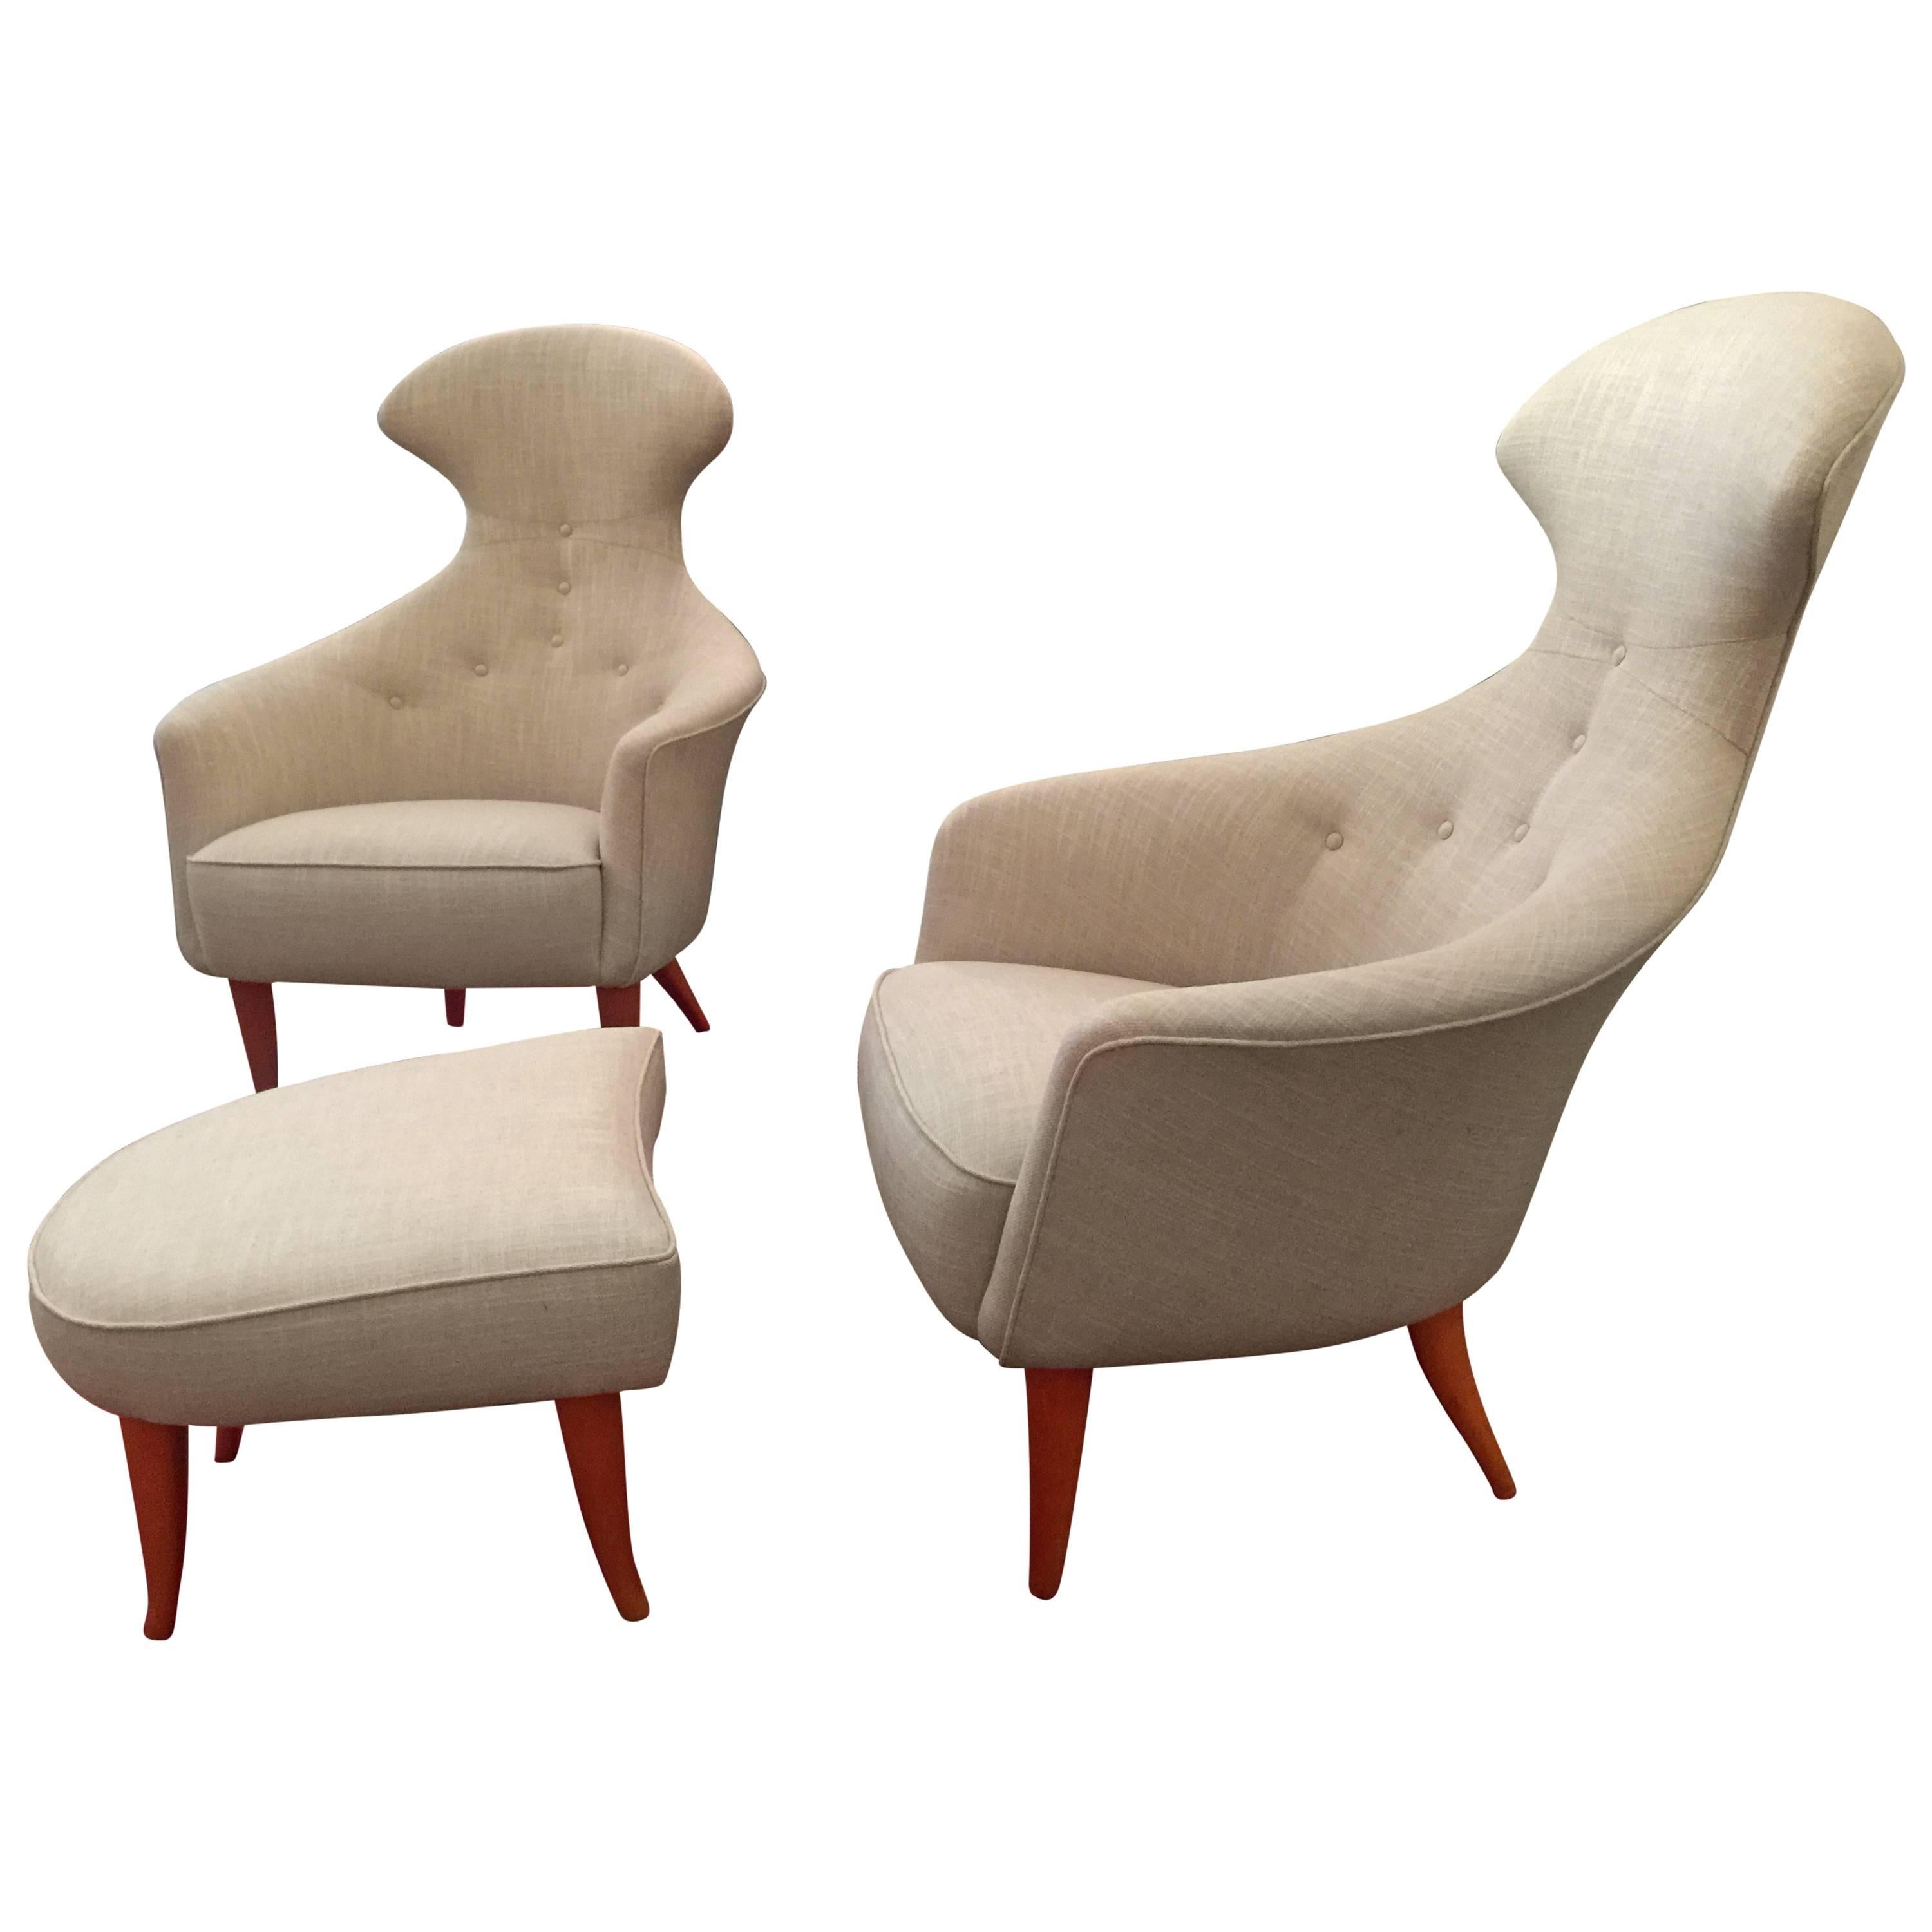 Pair of High Back Sculptural Chairs by Kerstin Hörlin-Holmquist